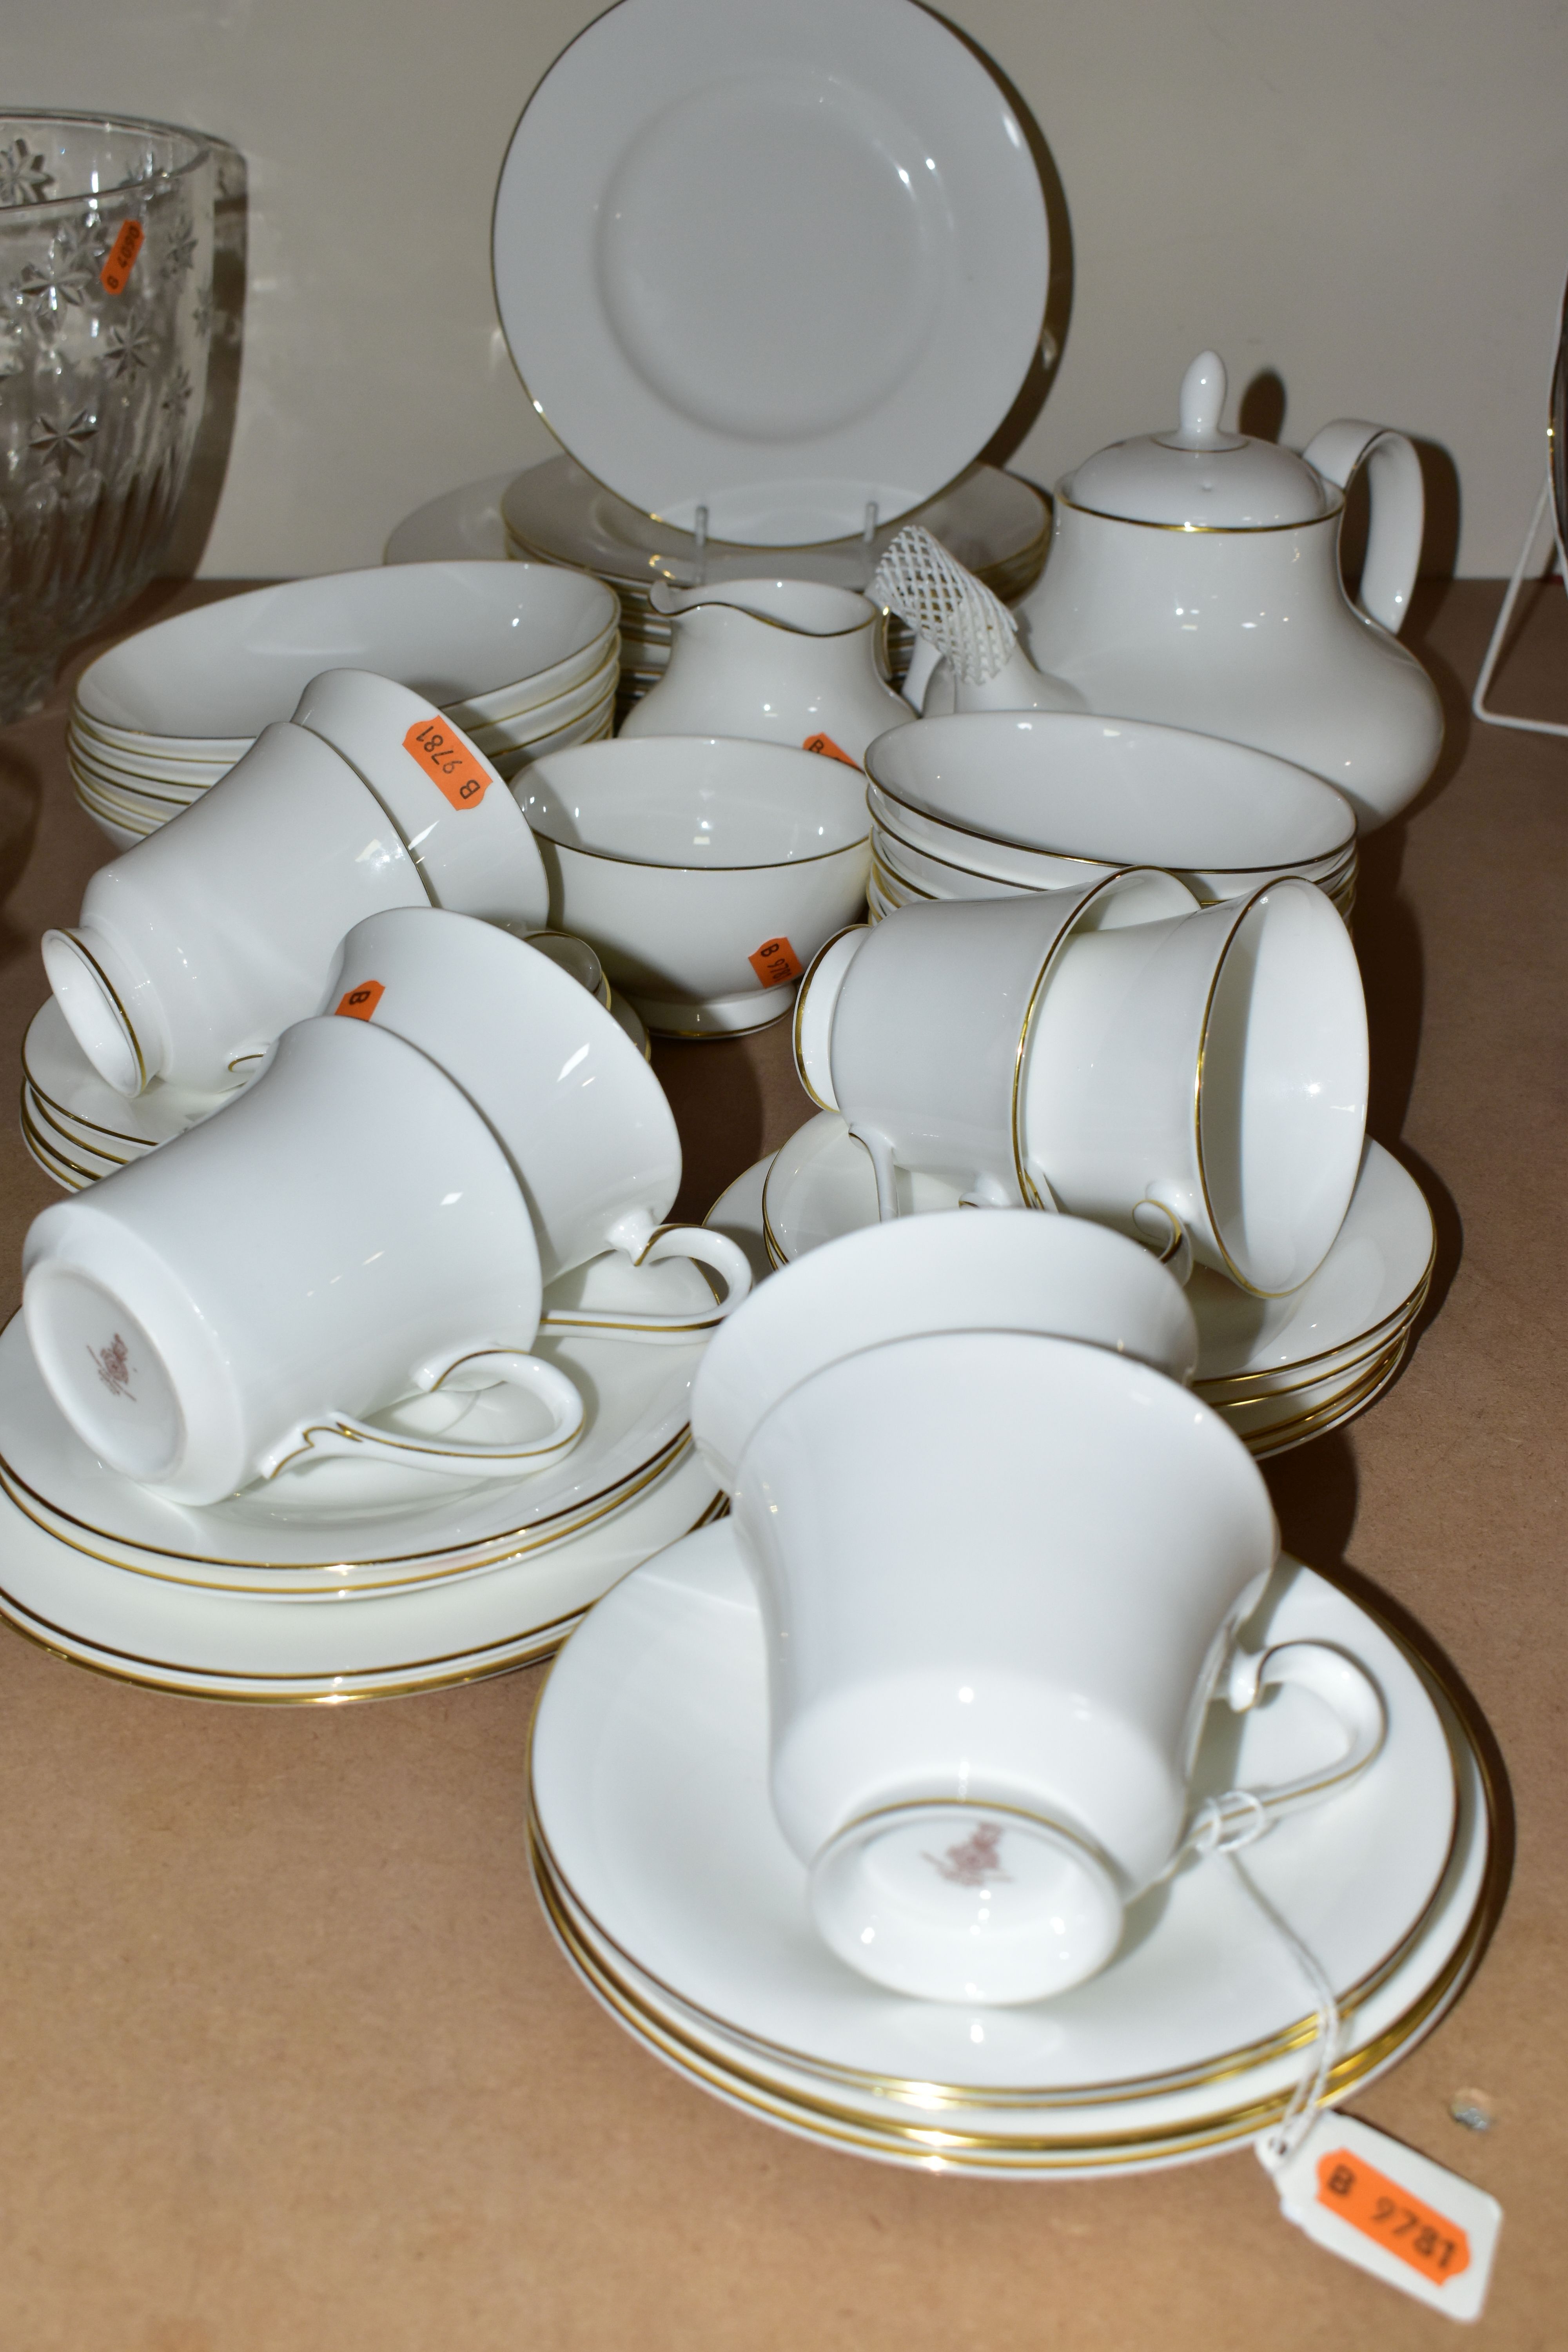 A ROYAL DOULTON 'SOPHIA' PATTERN PART DINNER AND TEA SET, comprising eight cups H5126 (one cup has a